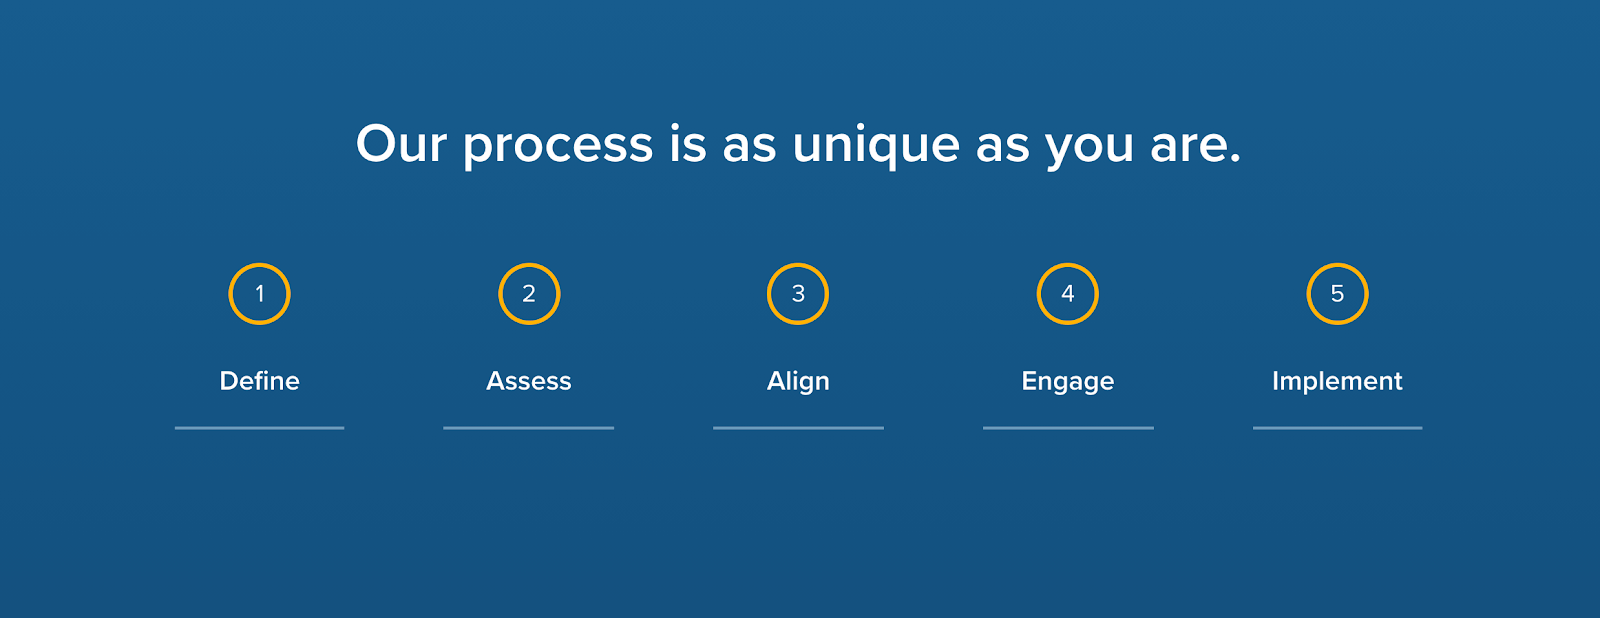 Our Process Gives Us Purpose